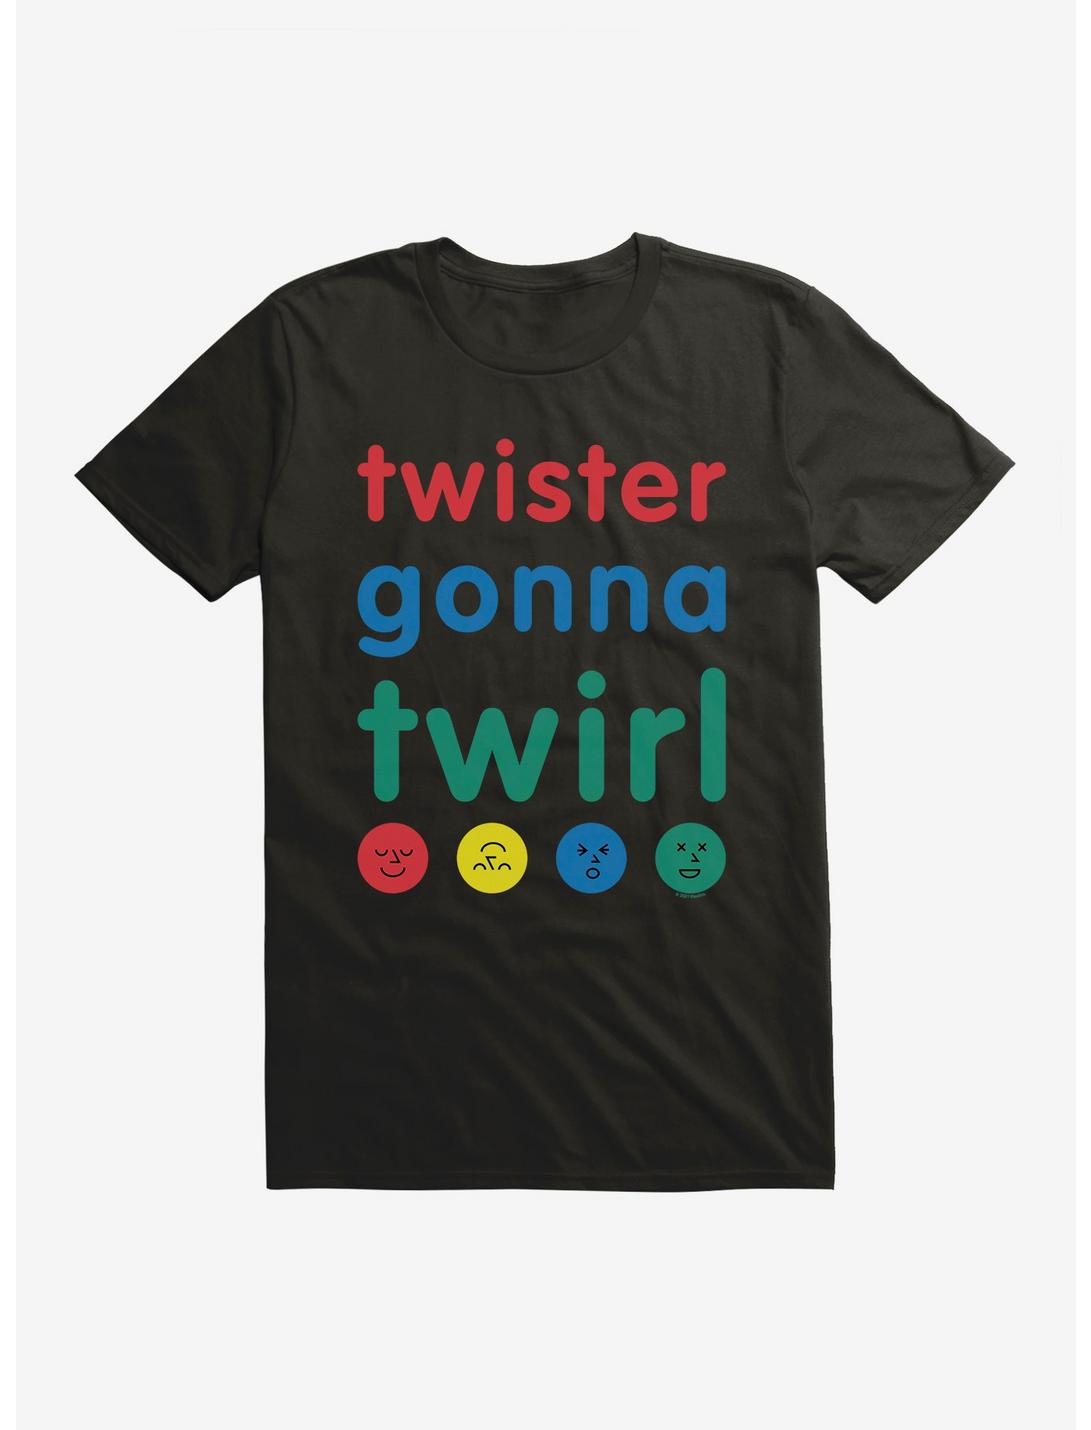 Twister Classic Board Game Twister Gonna Twirl T-Shirt, , hi-res